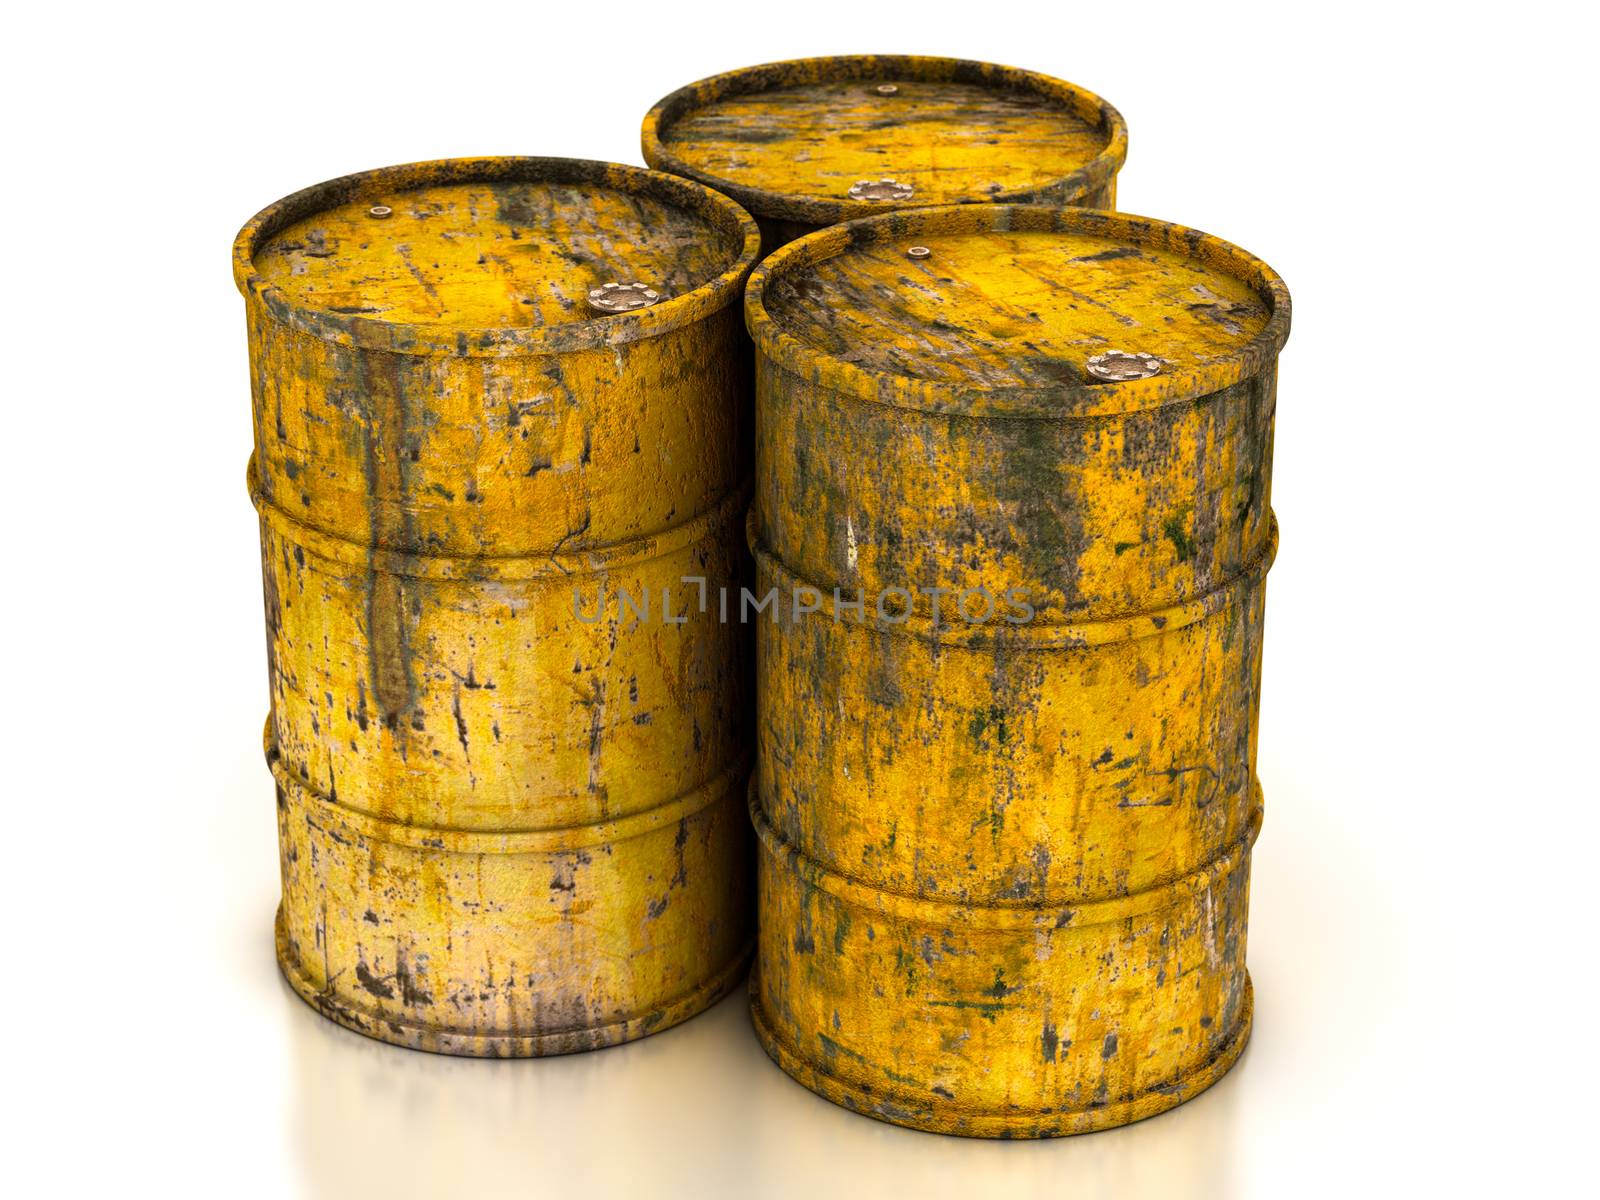 сhemical yellow old barrels on a white background